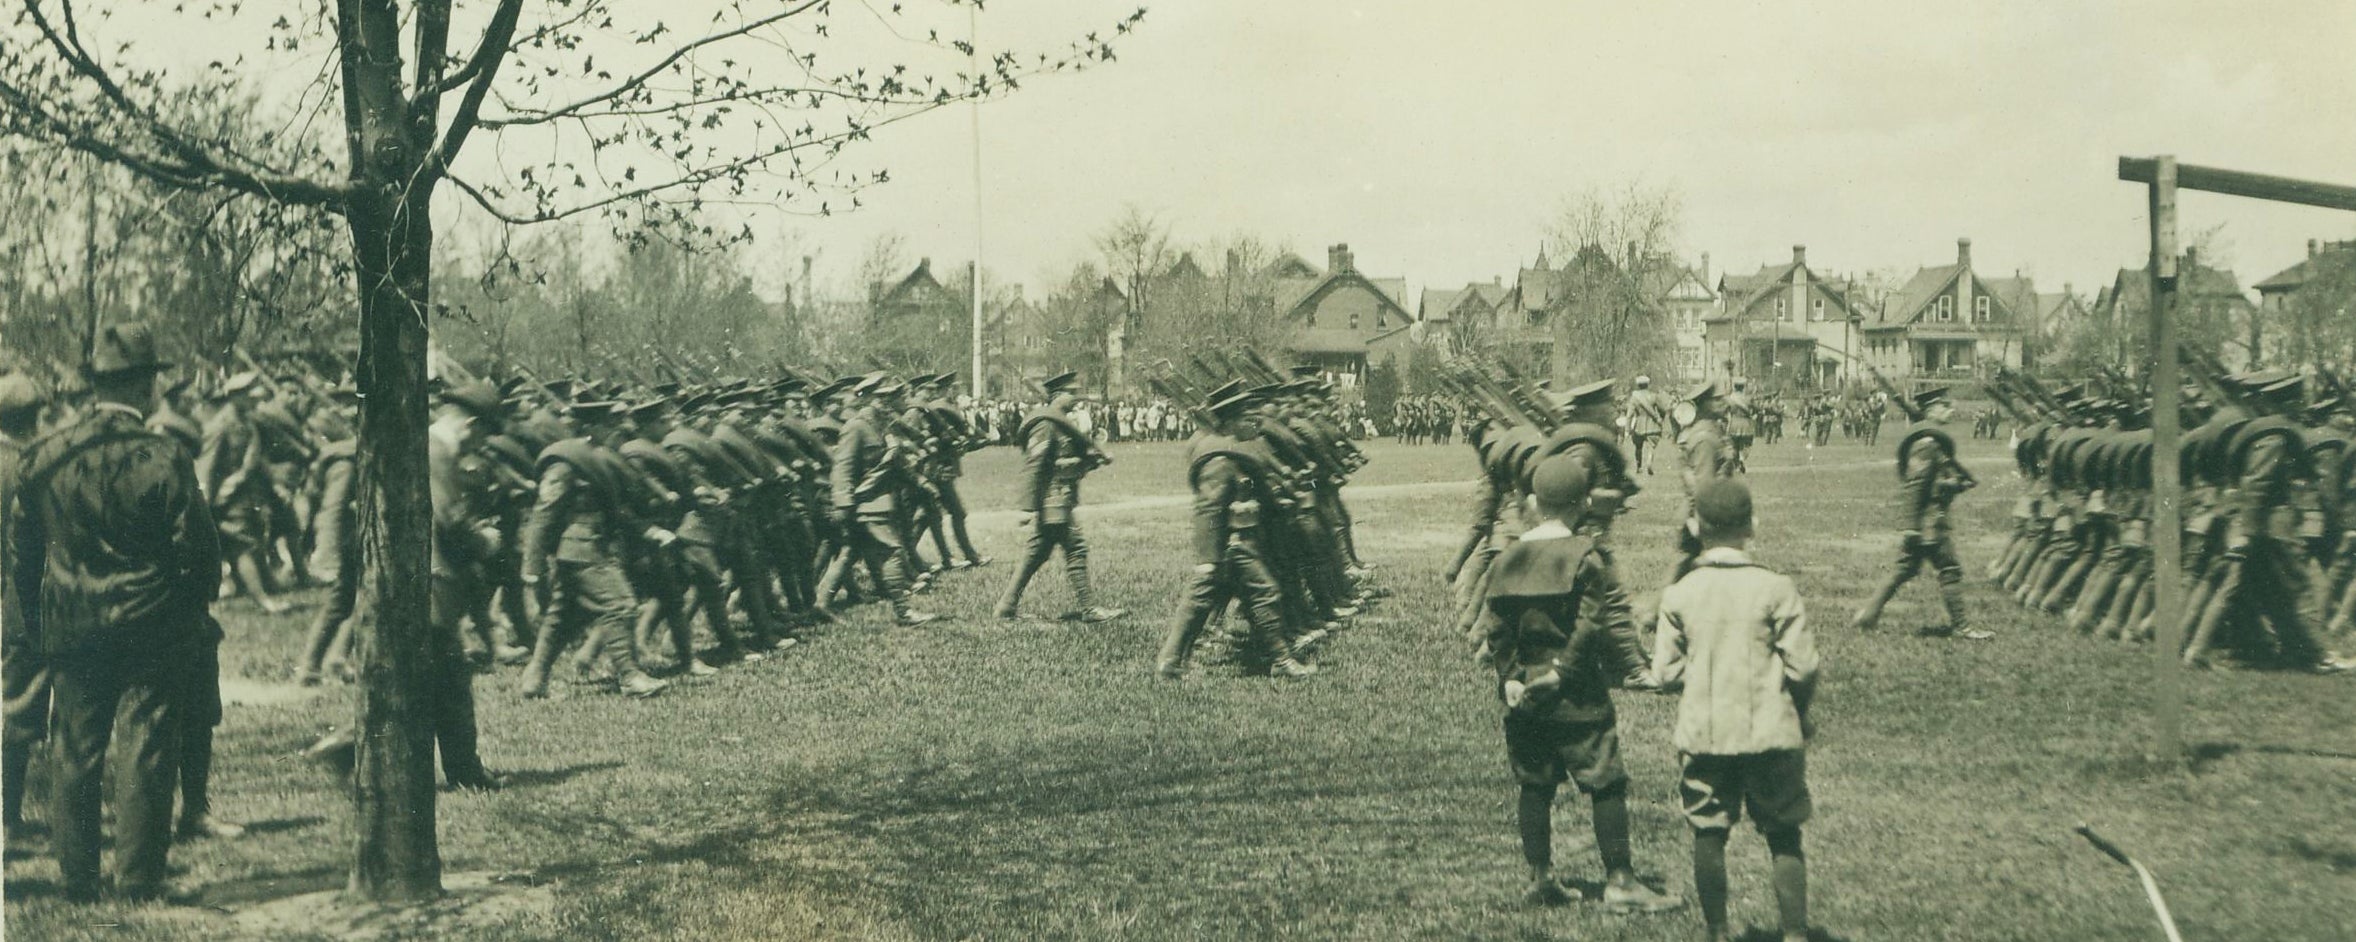 Archival image of Berlin, Ontario with soldiers marching park